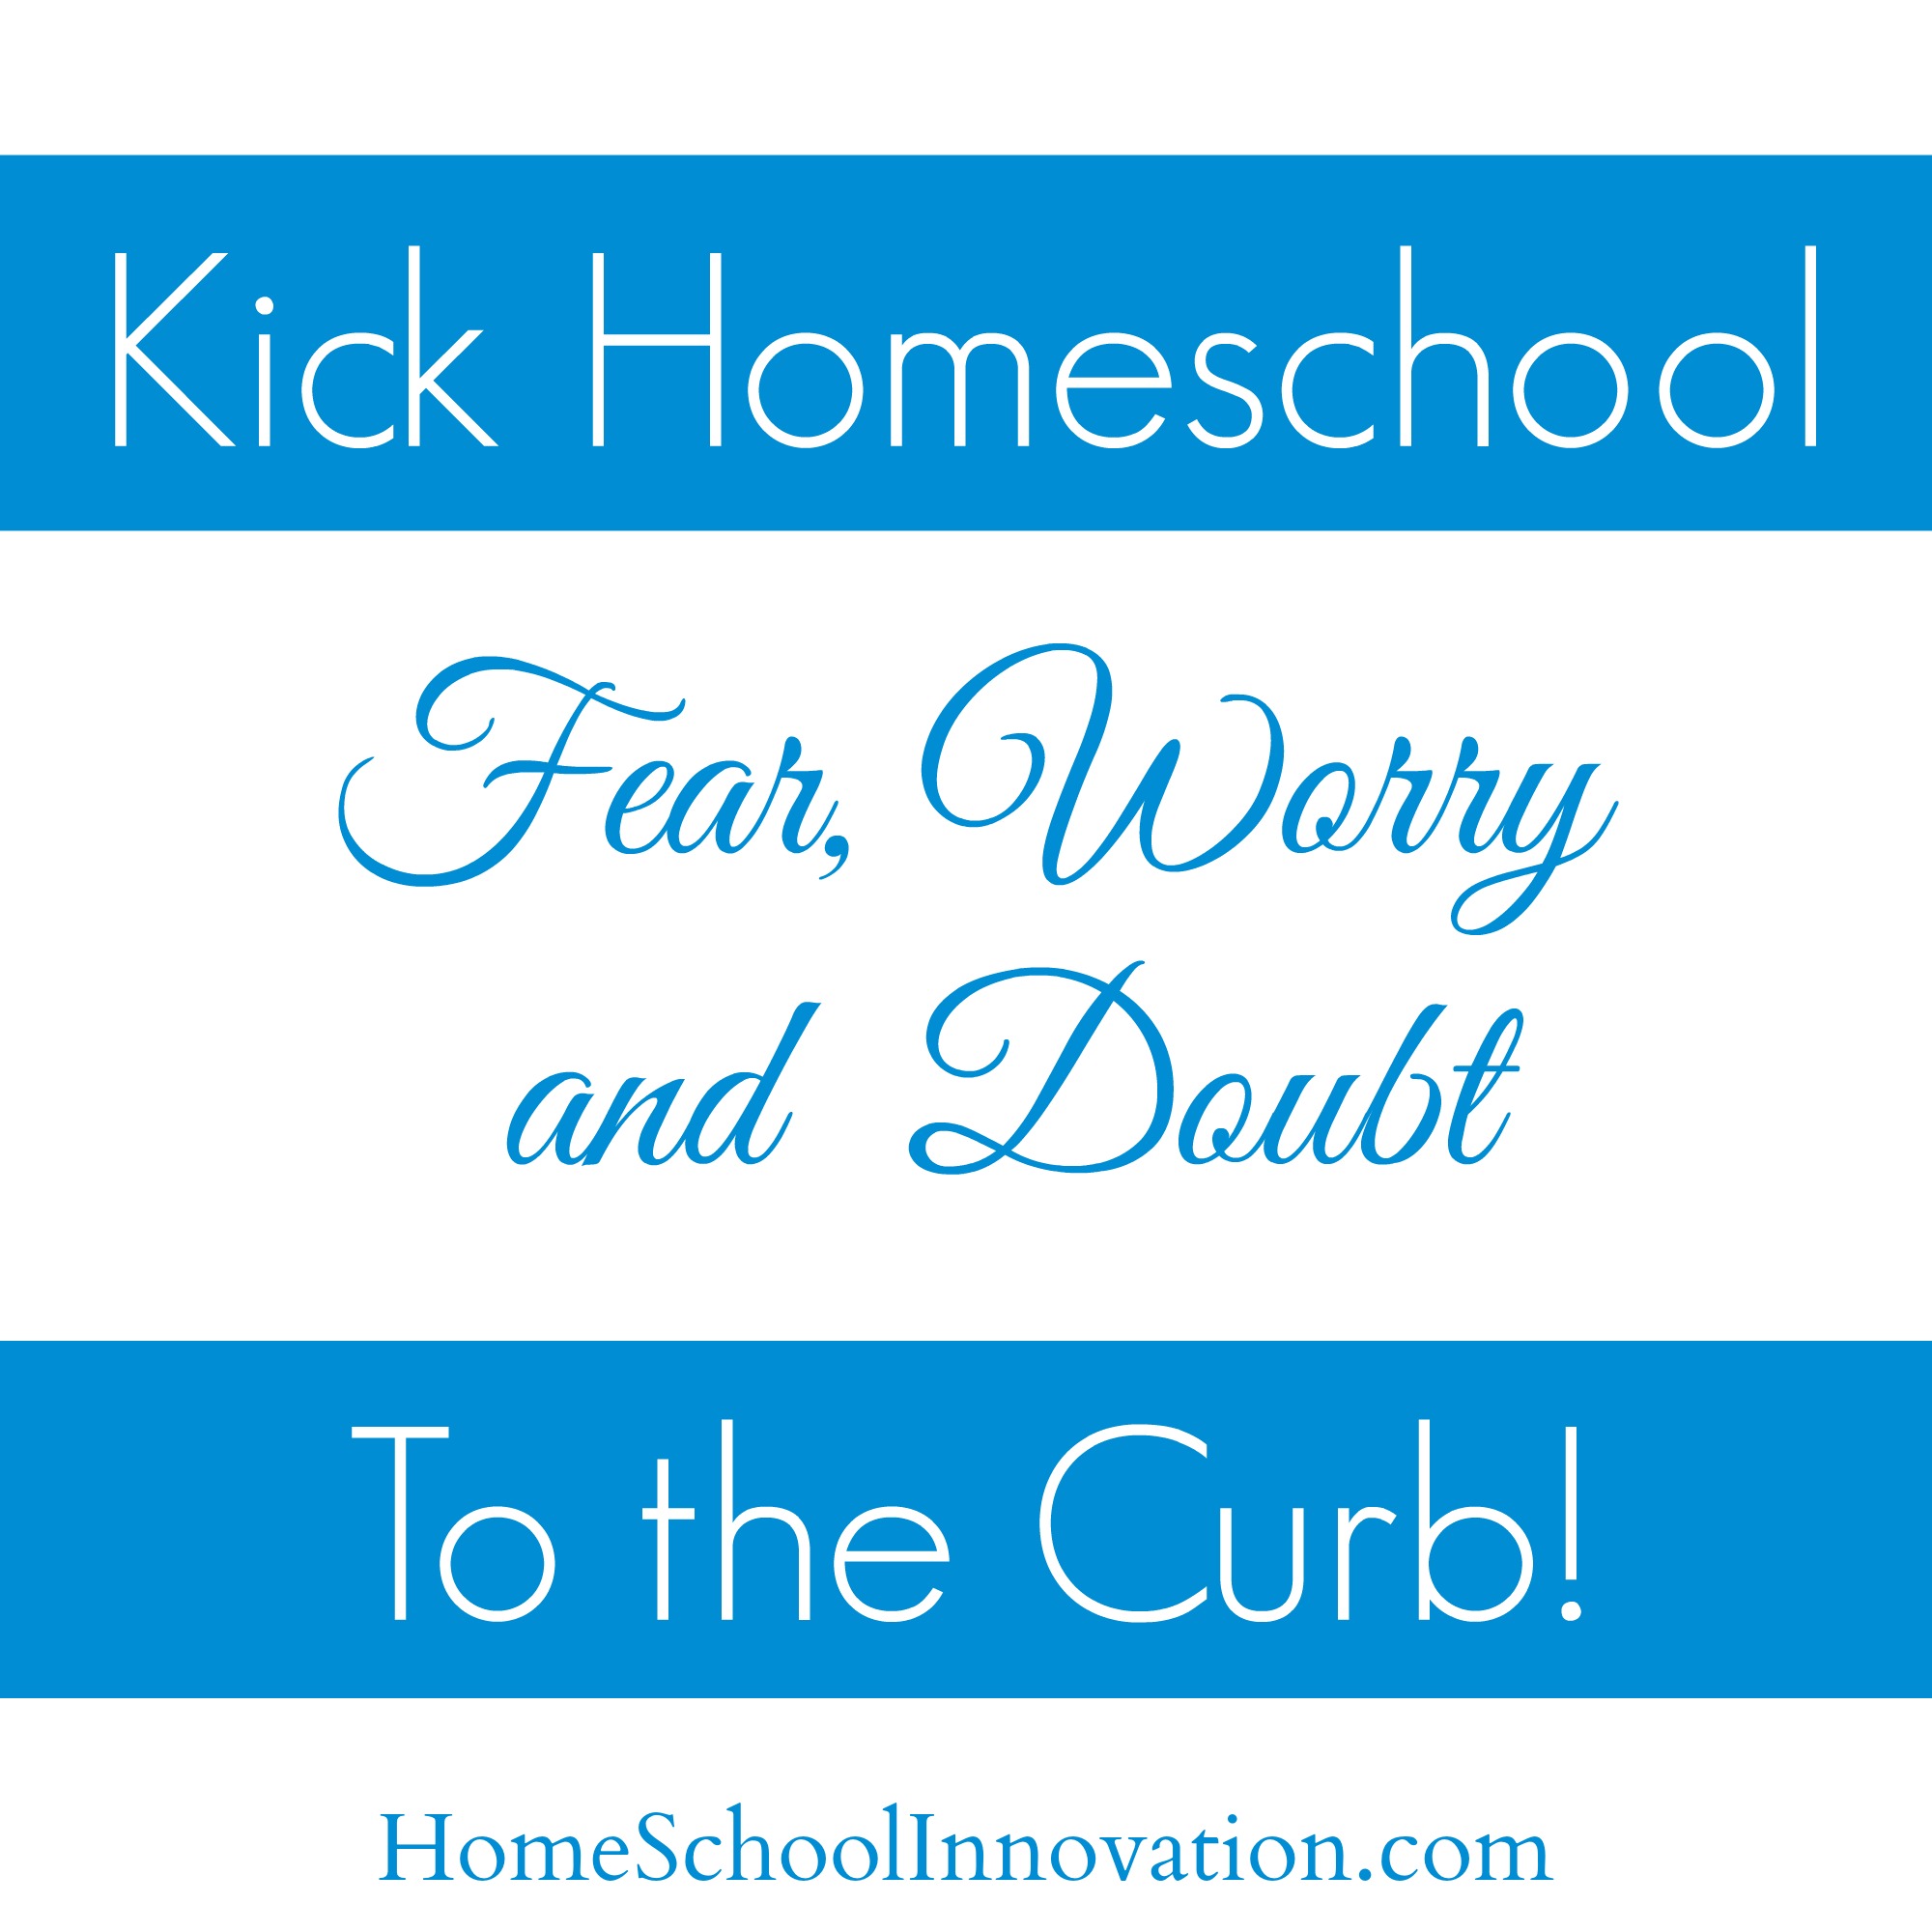 Kick Homeschool Fear, Worry and Doubt to the Curb